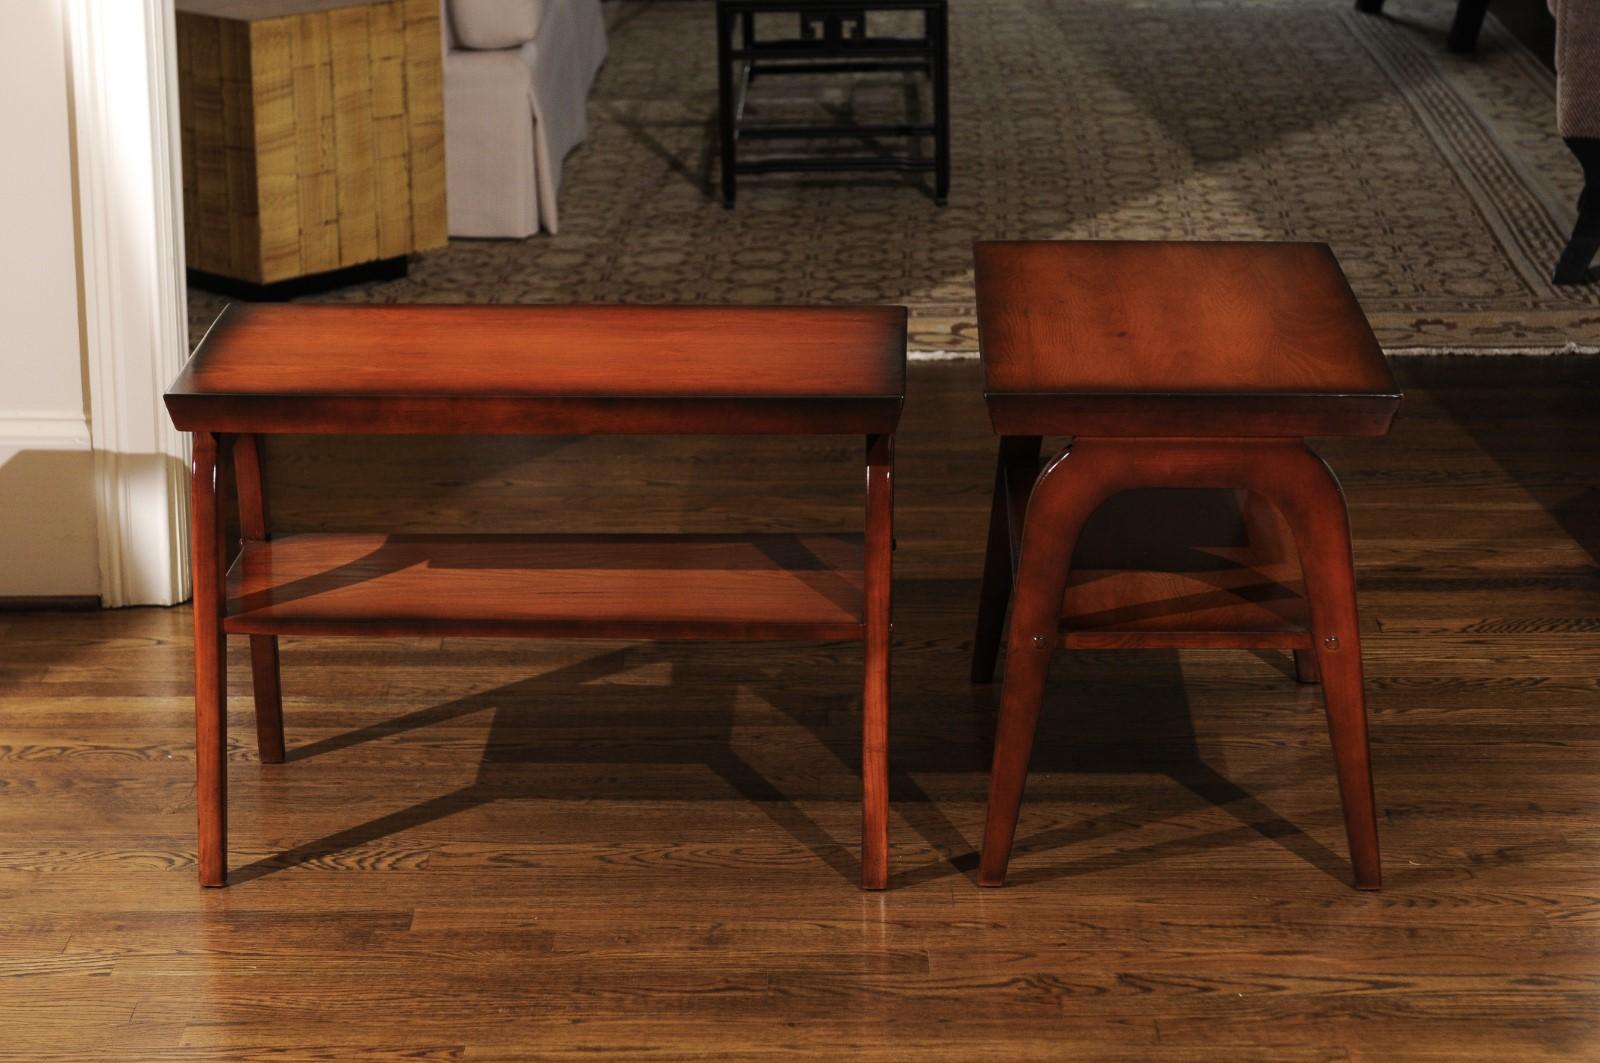 An exceptional pair of vintage end tables from a nearly impossible to find series. These unusual examples are a part of the boutique Far Horizons Collection, produced by long time Ficks Reed designer John Wisner, introduced in 1954. Beautifully